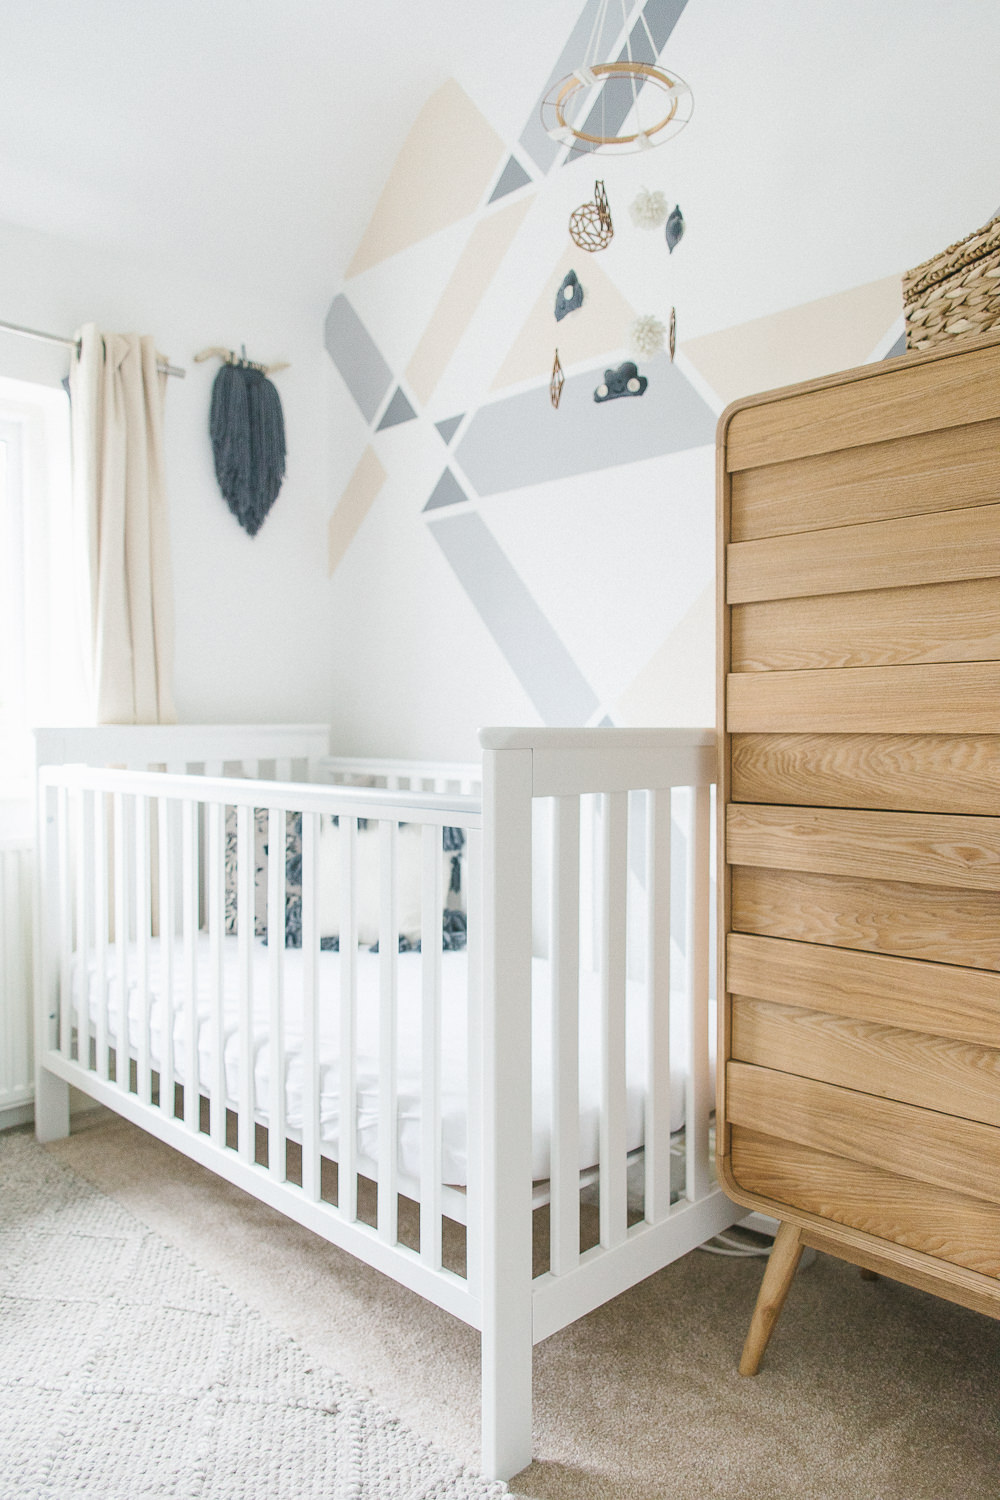 Classic unisex nursery in grey, white and wood